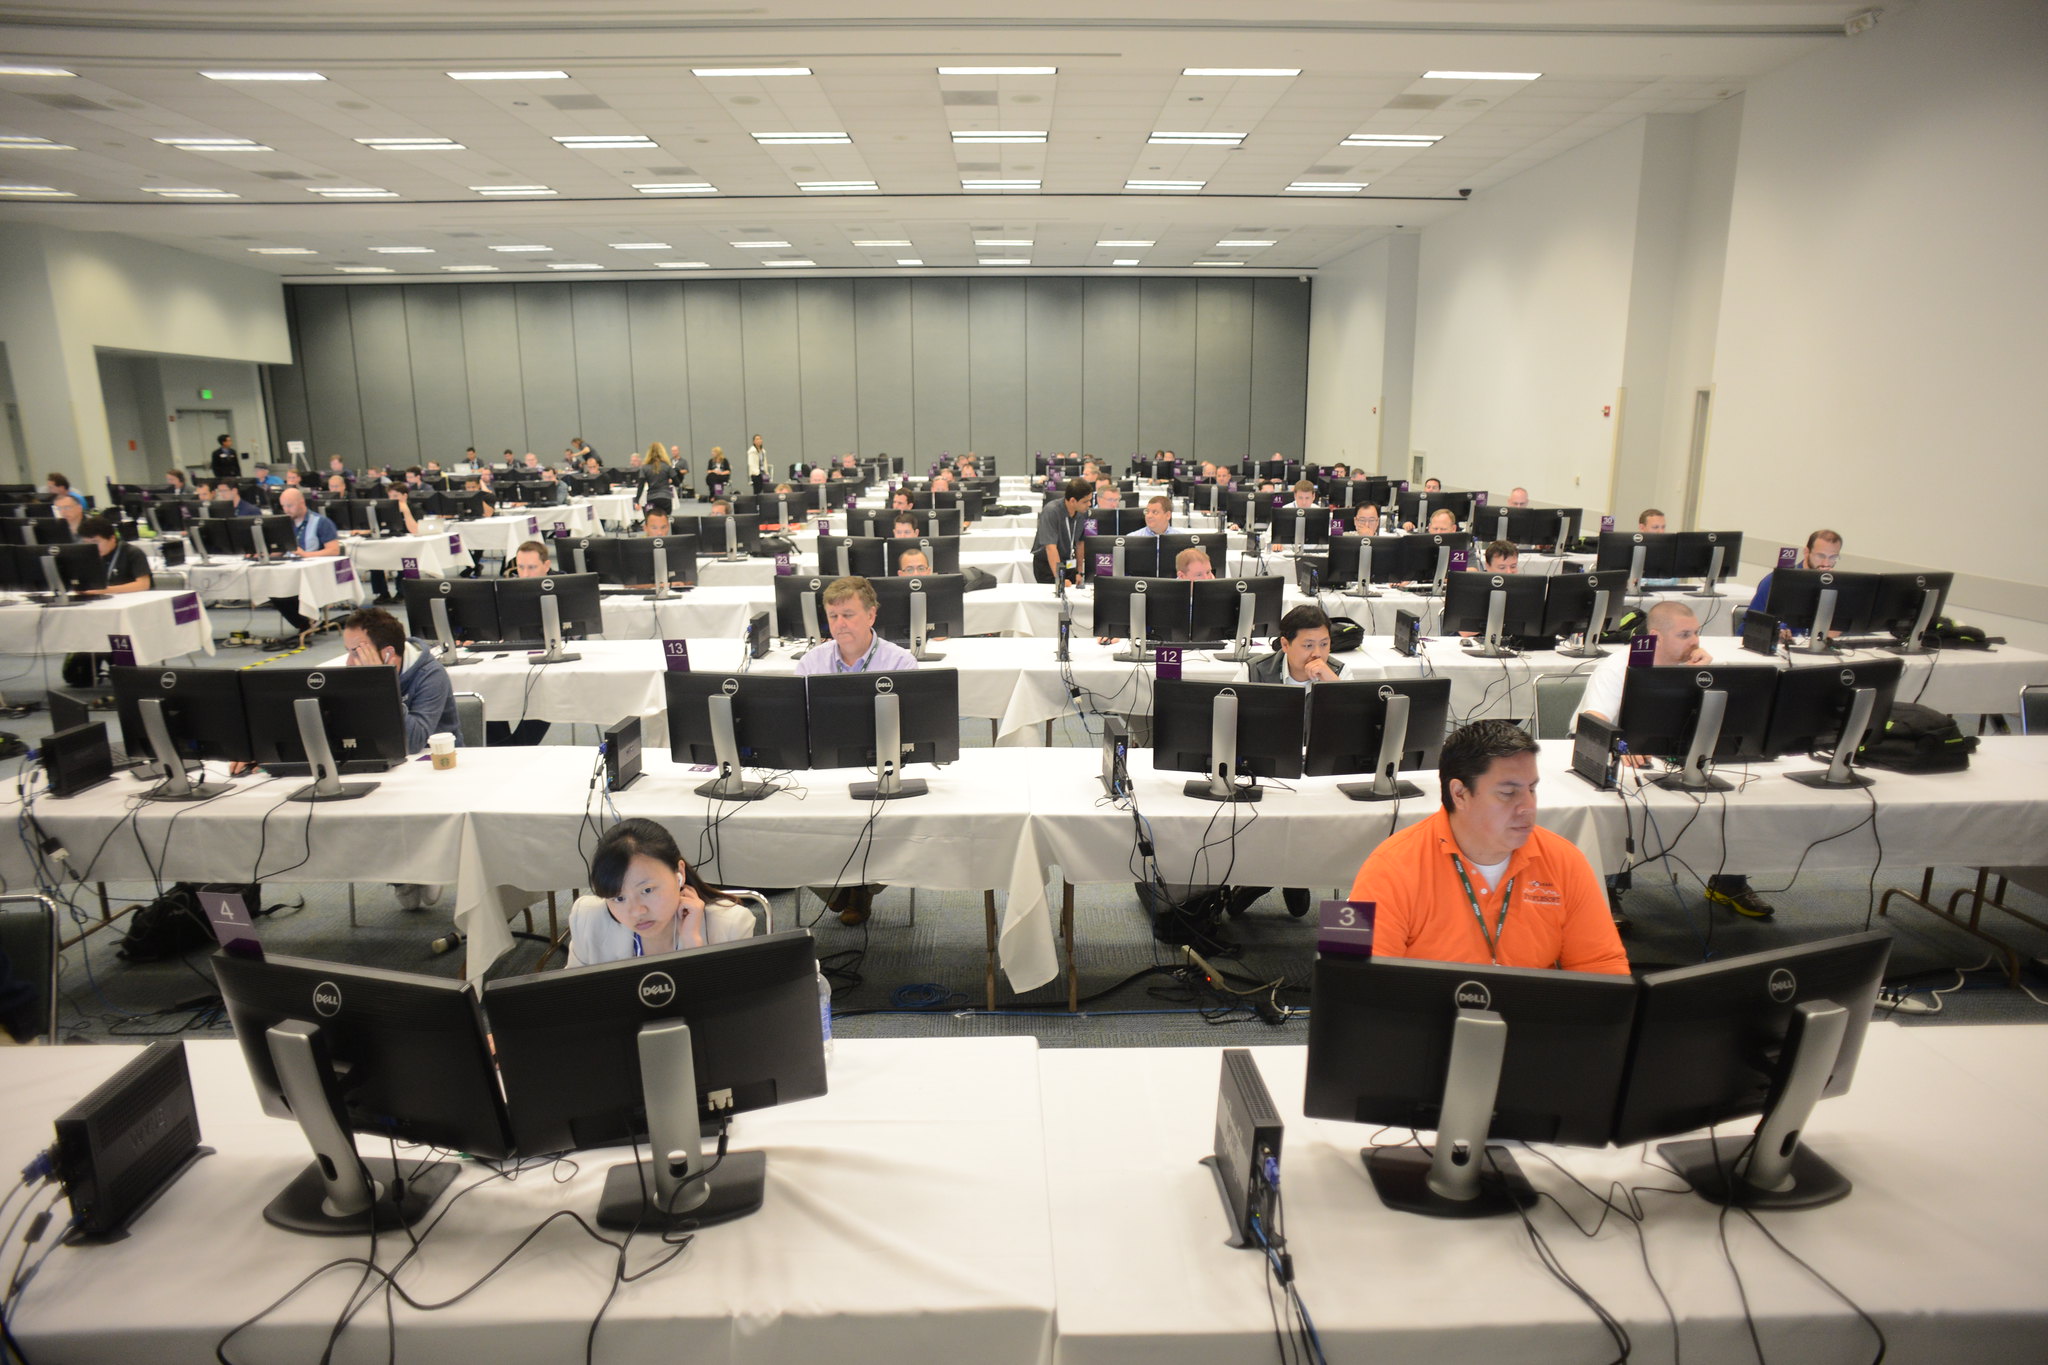 A computer lab filled with computers, with people sitting at them working.